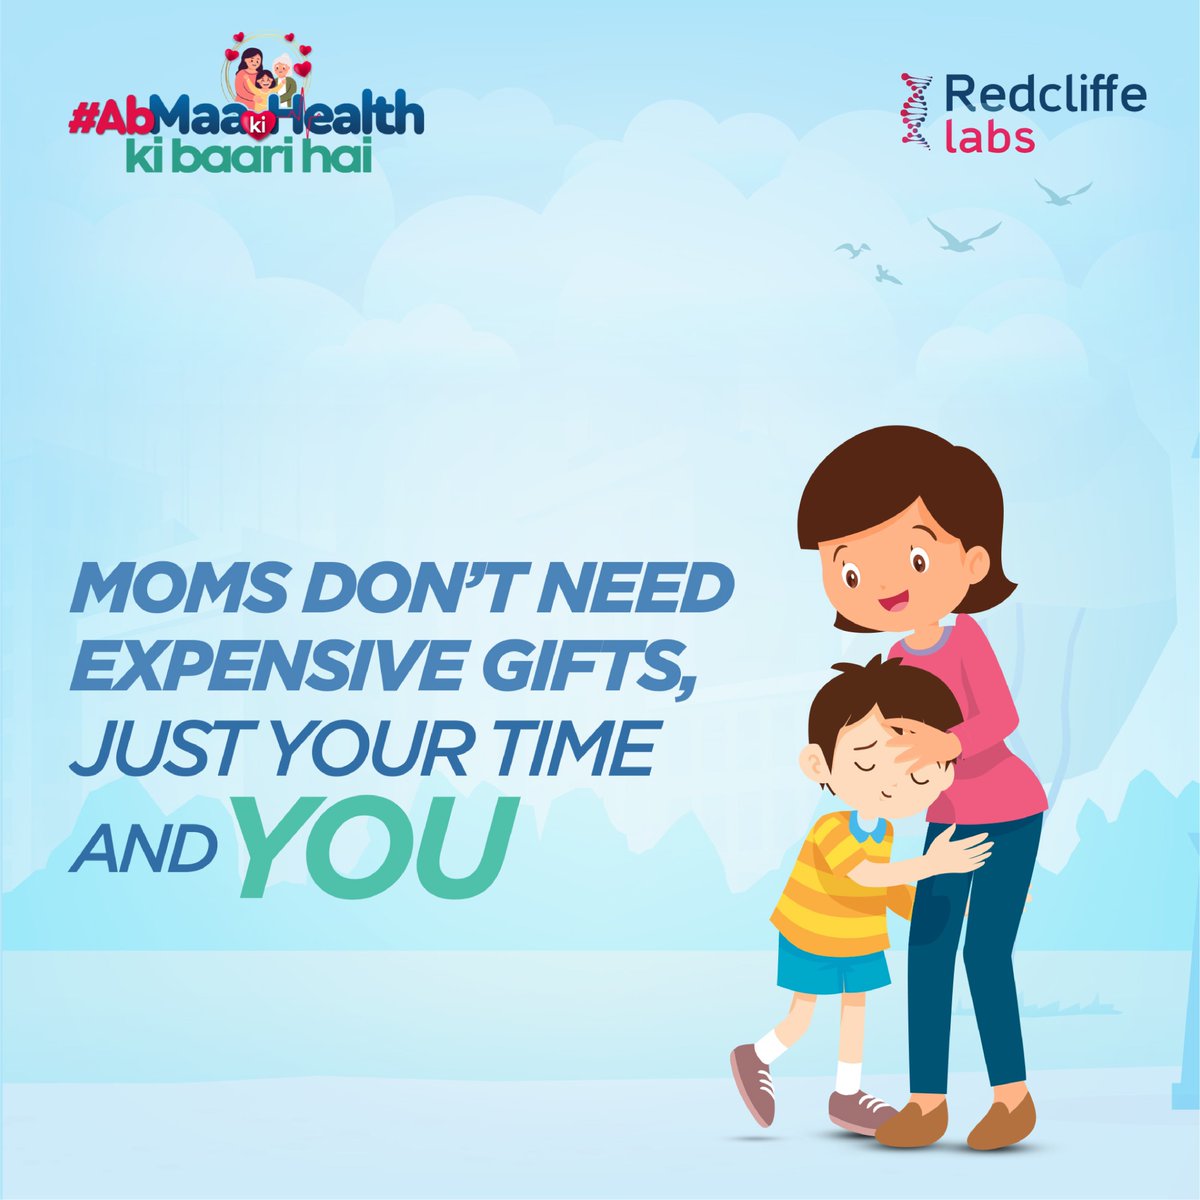 Hold the dots and scroll really fast to find the best gift for your mother. #redcliffelabs #healthcare #mothersday #mothersdaygift #india #health #indianmom #mothersday2024 #motherslove #abmaakihealthkibaarihai #mothercare #gift #perfectgifts #maa #Moms